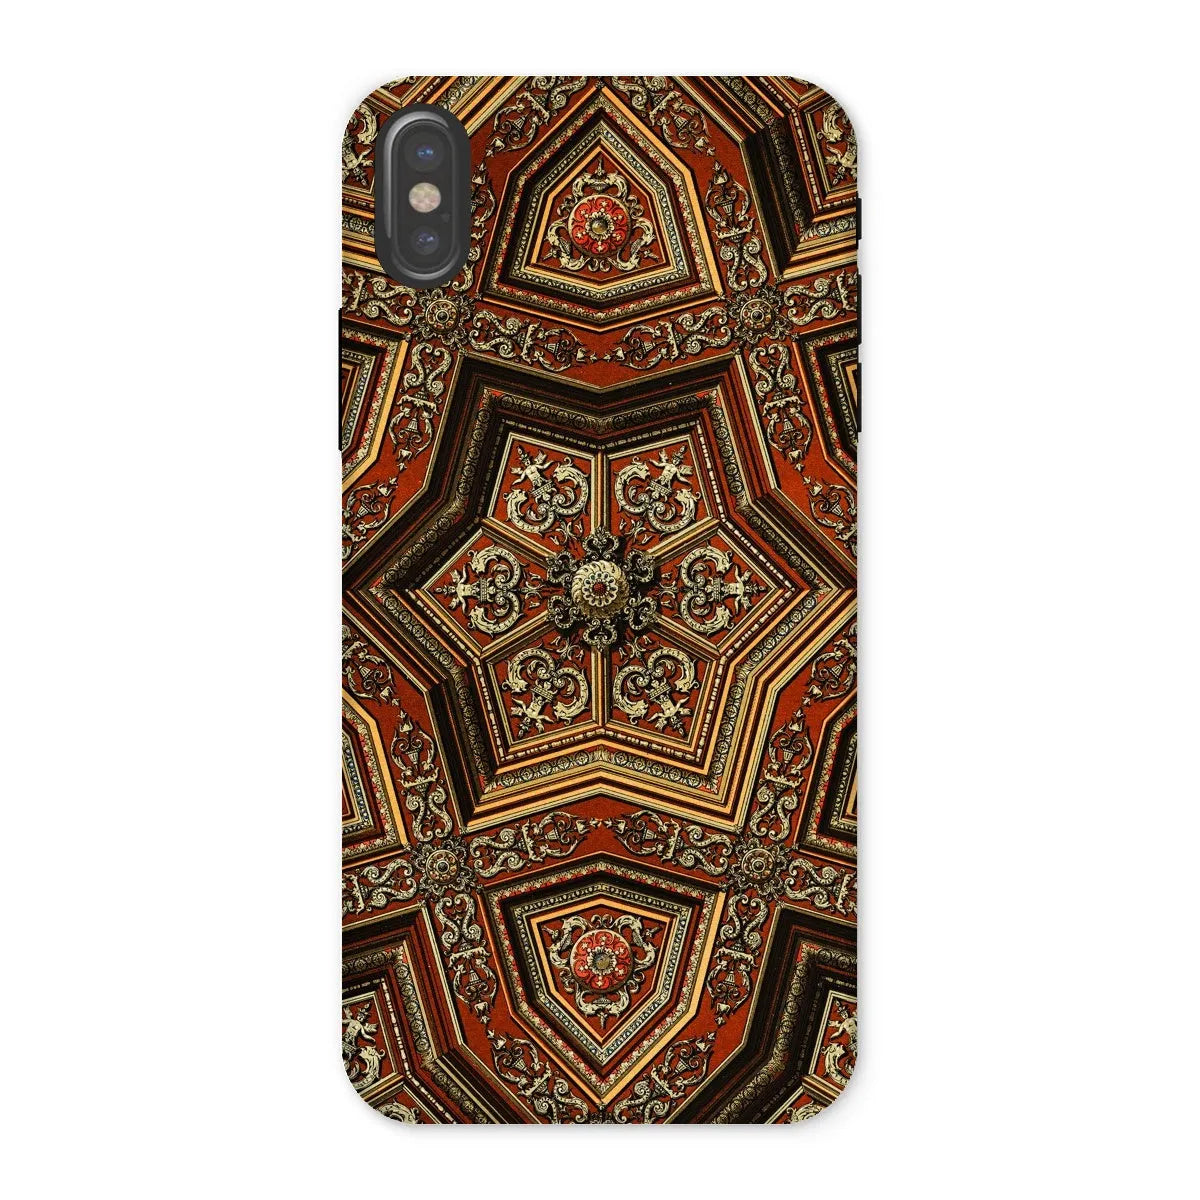 Renaissance Pattern By Auguste Racinet Tough Phone Case - Iphone x / Gloss - Mobile Phone Cases - Aesthetic Art